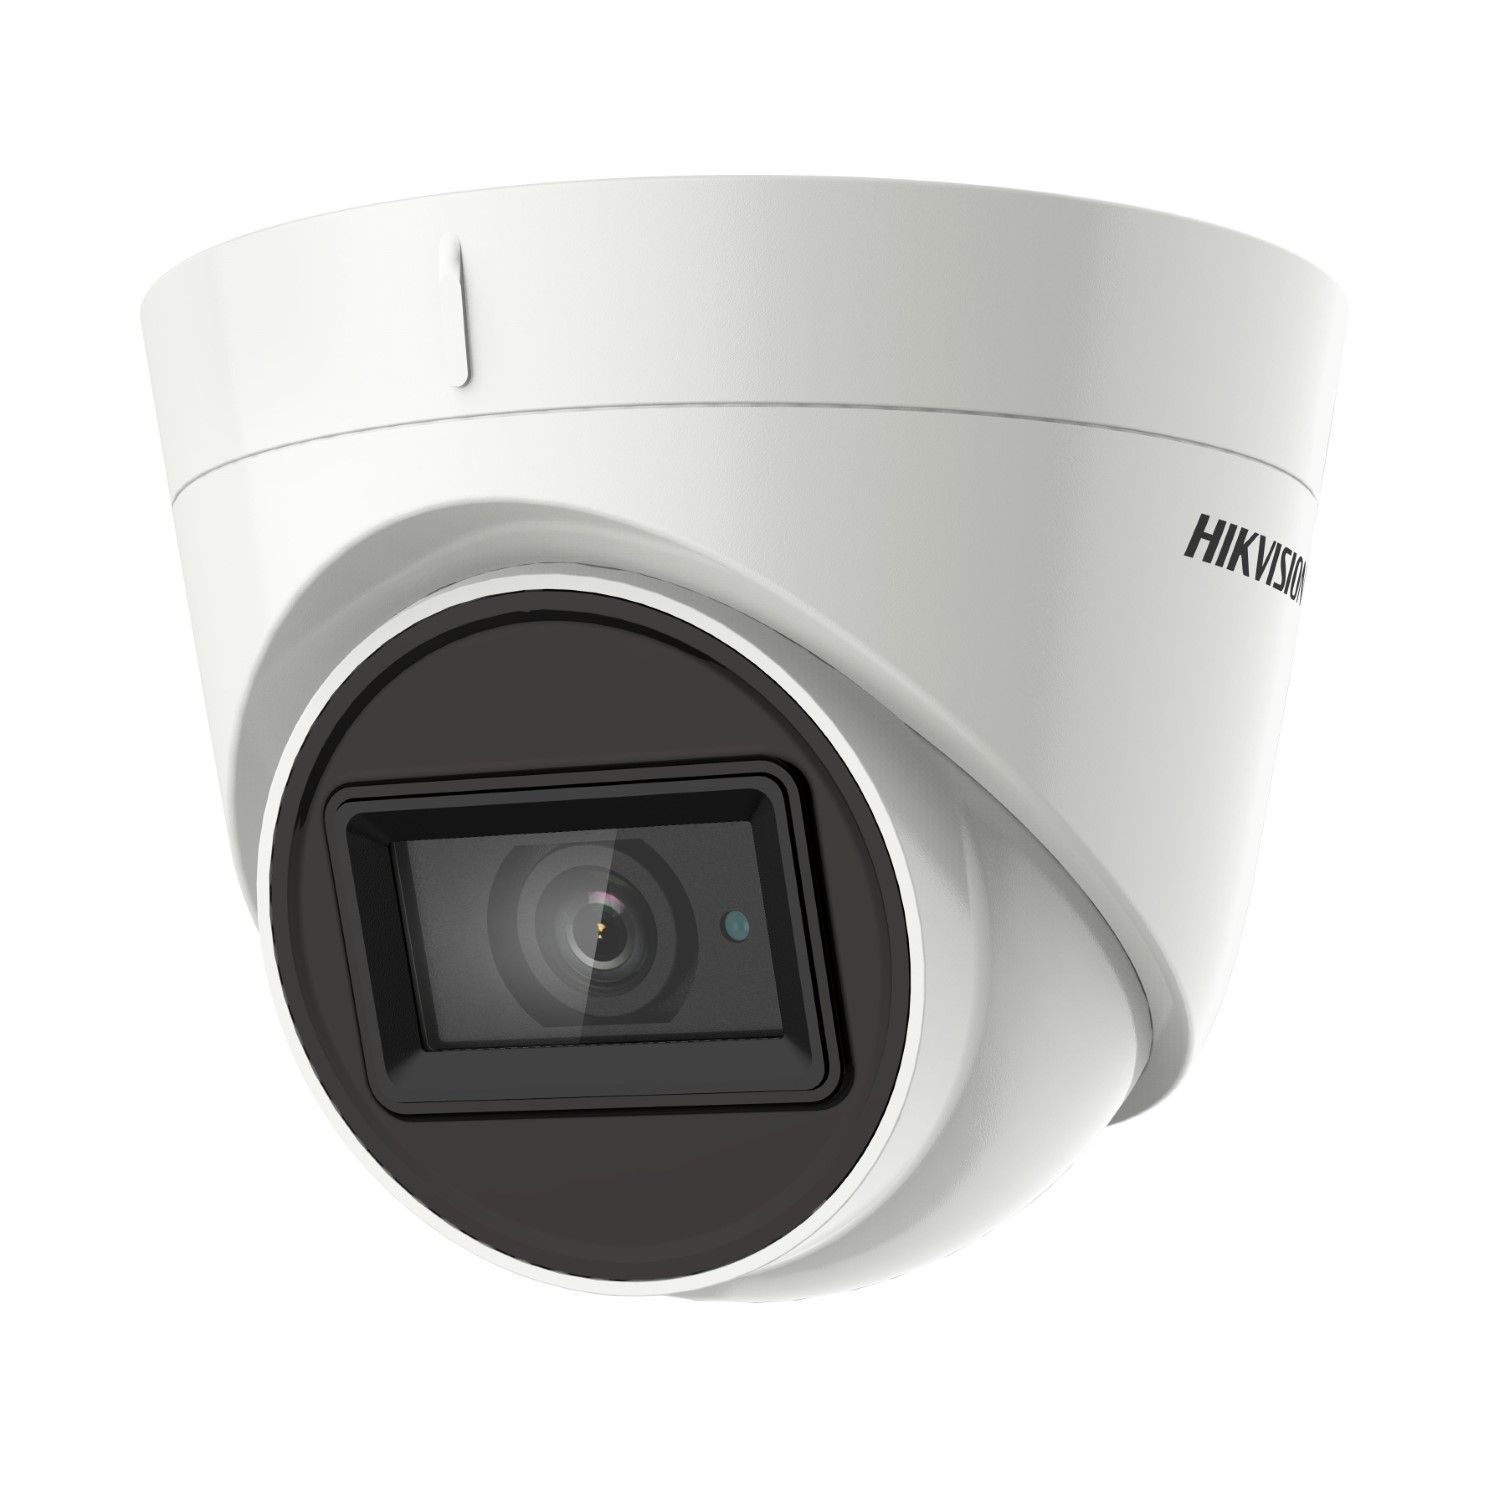 HIKVISION DS-2CE78H8T-IT3F Turbo HD Camera